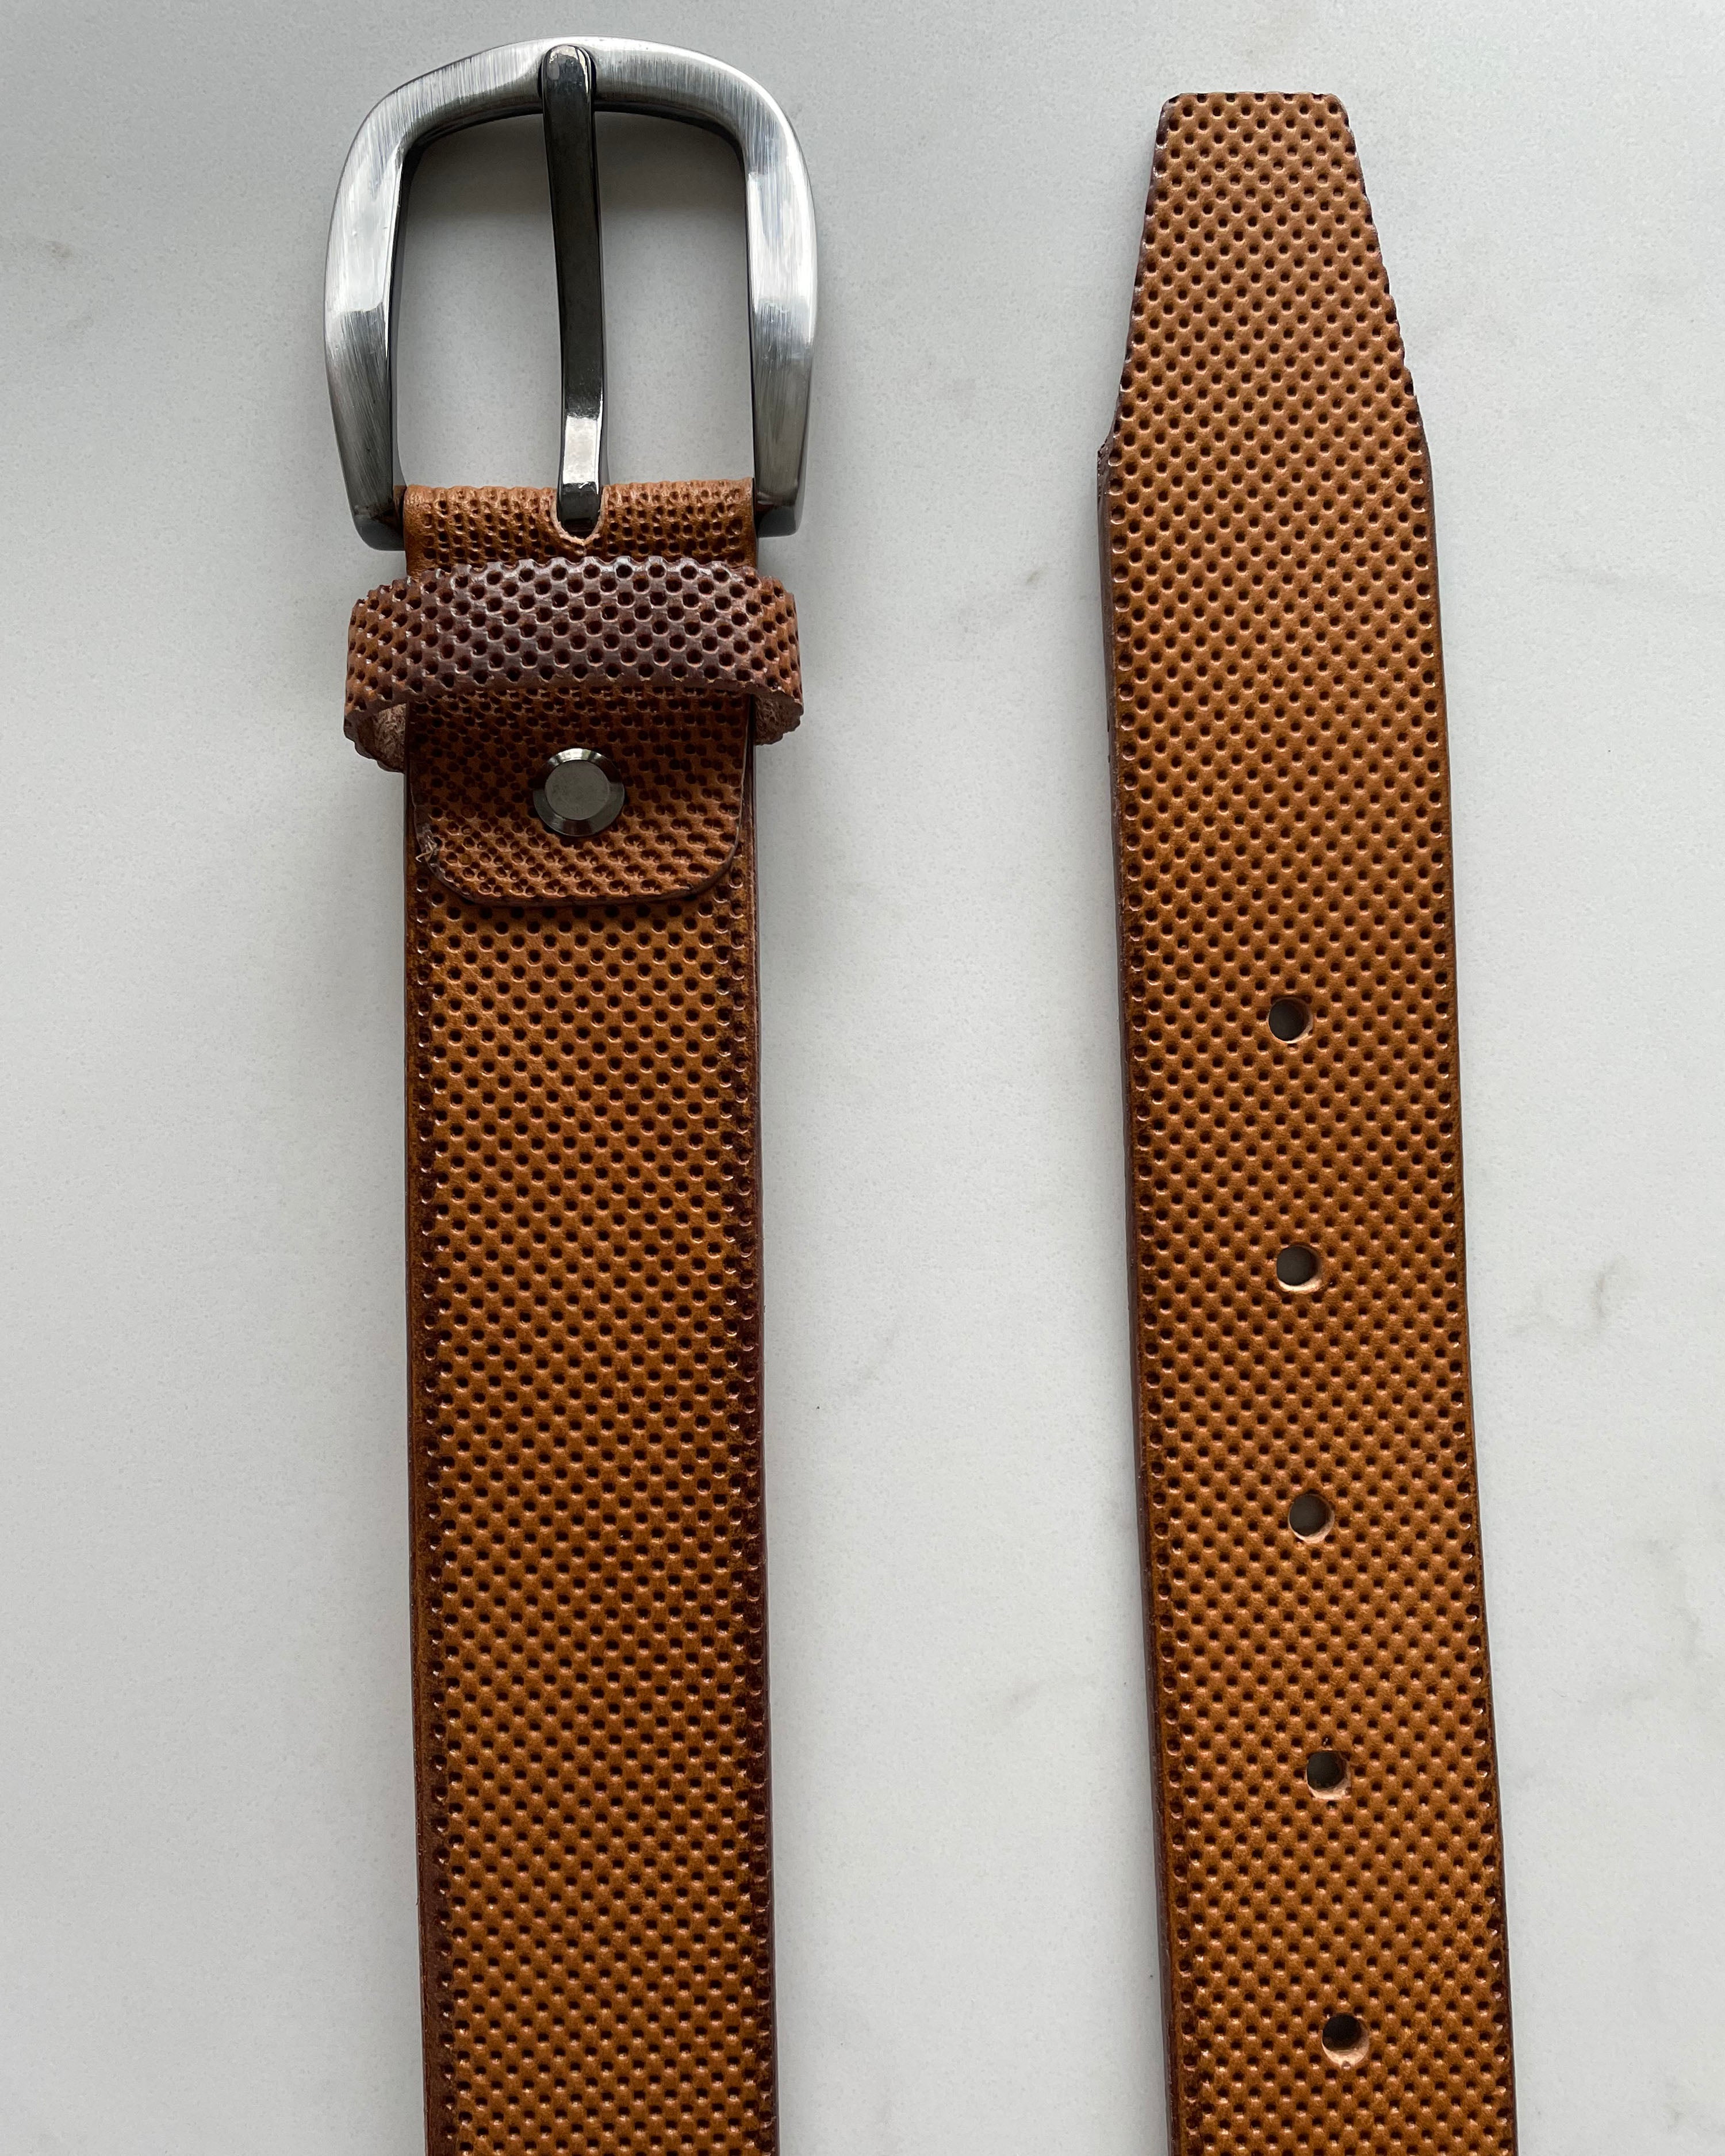 MIELE TAN LEATHER BELT PERFORATED EMBOSSED HIDE 35MM